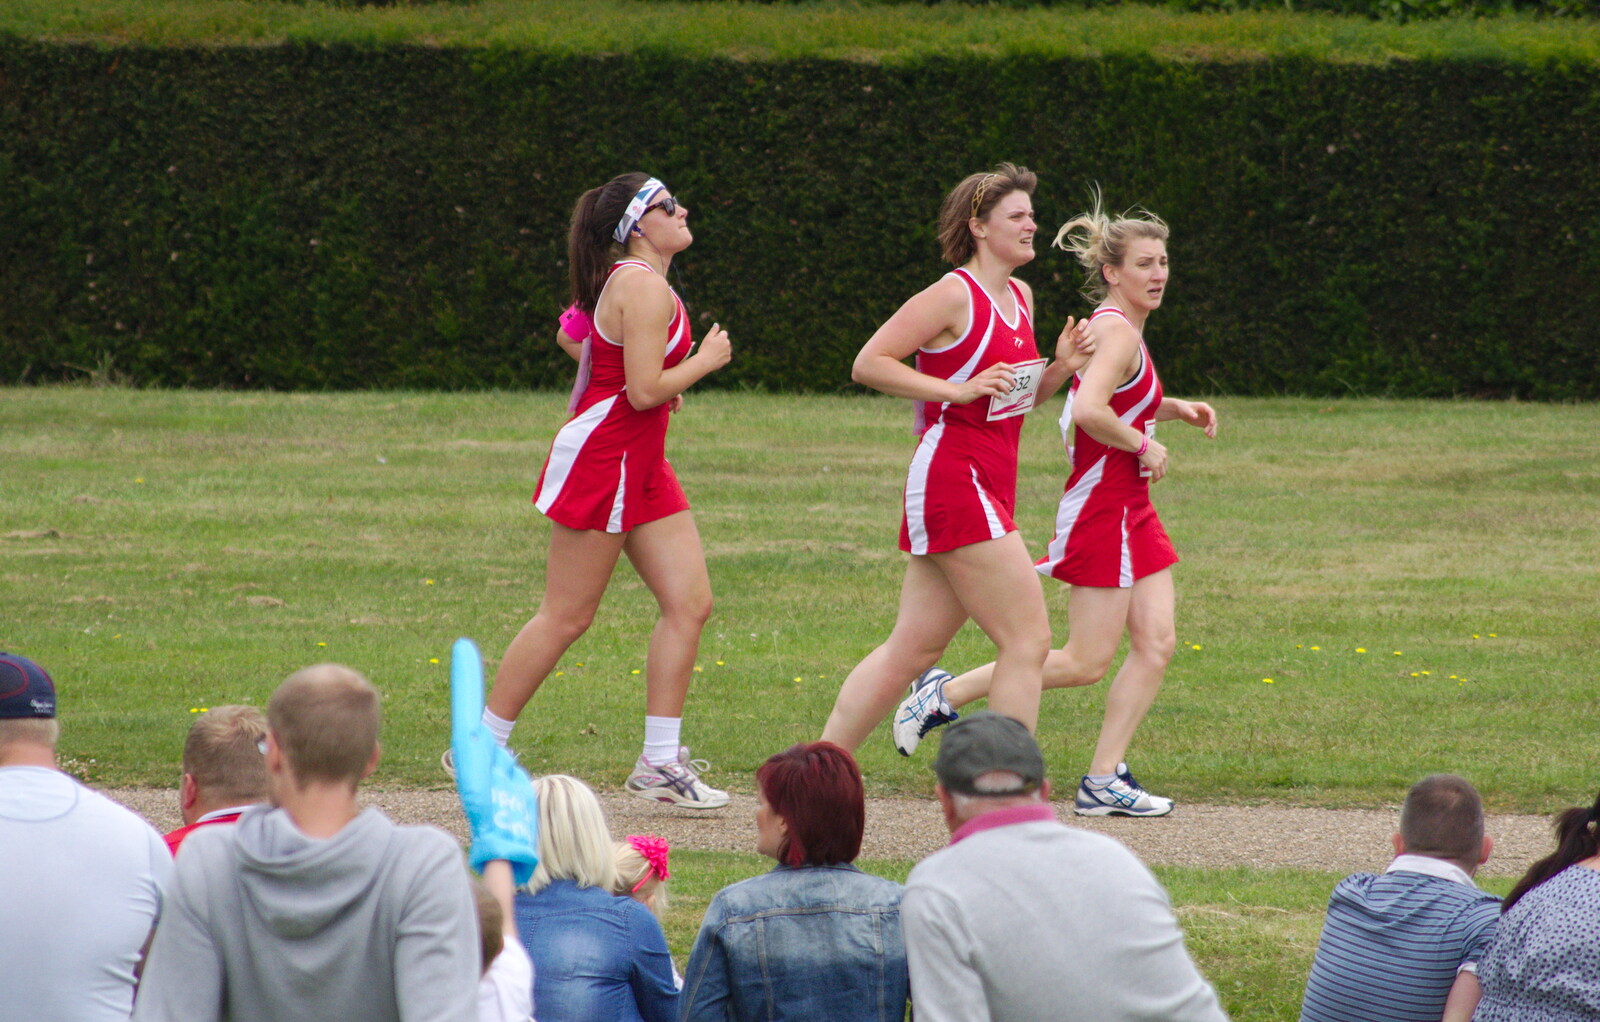 A netball team runs around from Isobel's Race For Life, Chantry Park, Ipswich - 11th June 2014